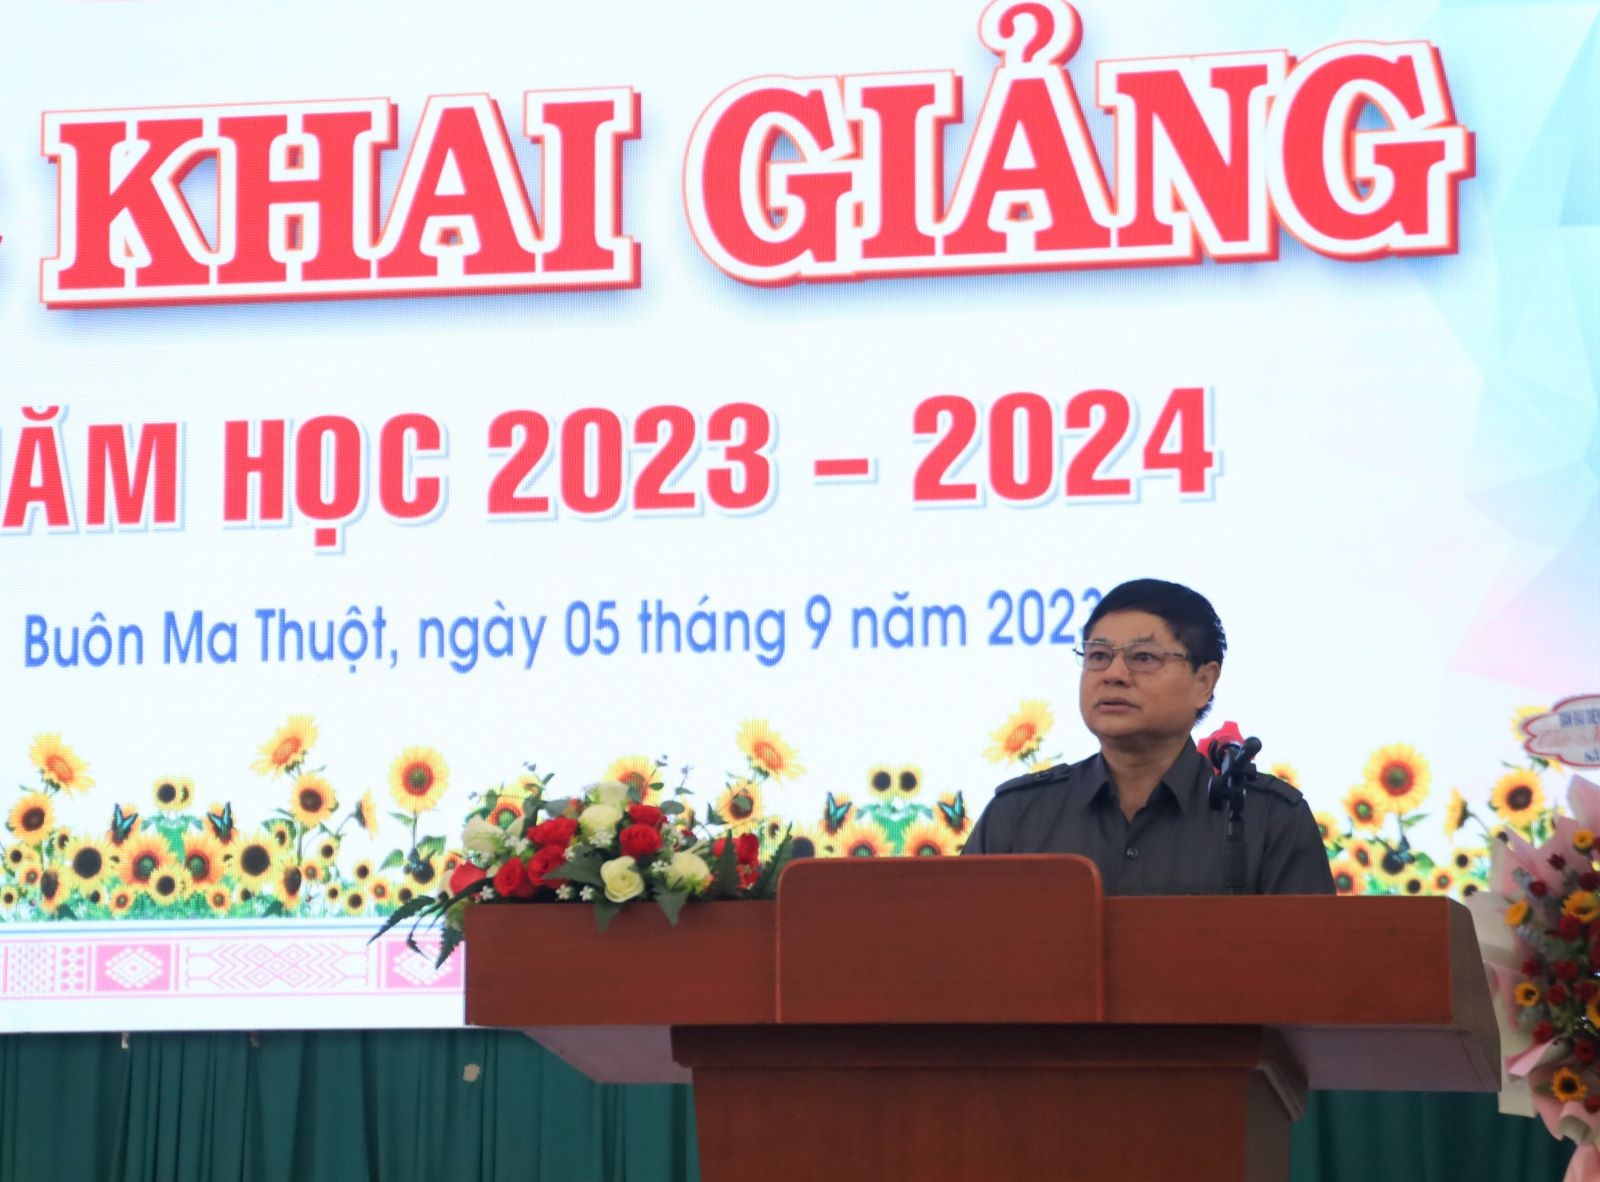 Nguyen Du High School celebrated the opening ceremony of the 2023-2024 school year